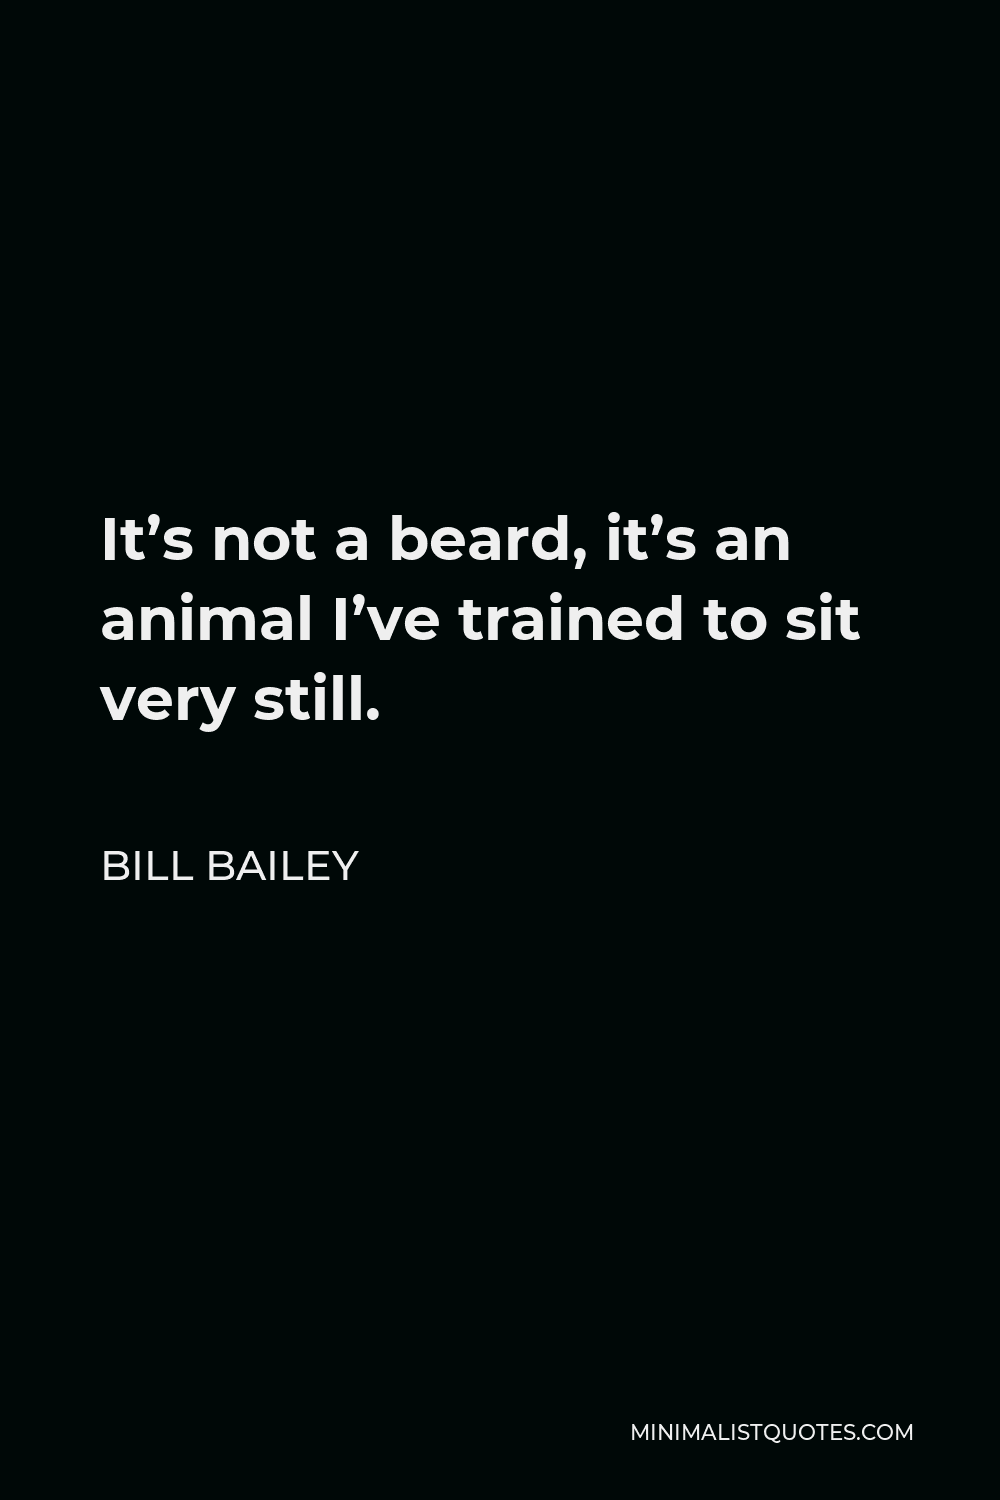 Bill Bailey Quote - It’s not a beard, it’s an animal I’ve trained to sit very still.